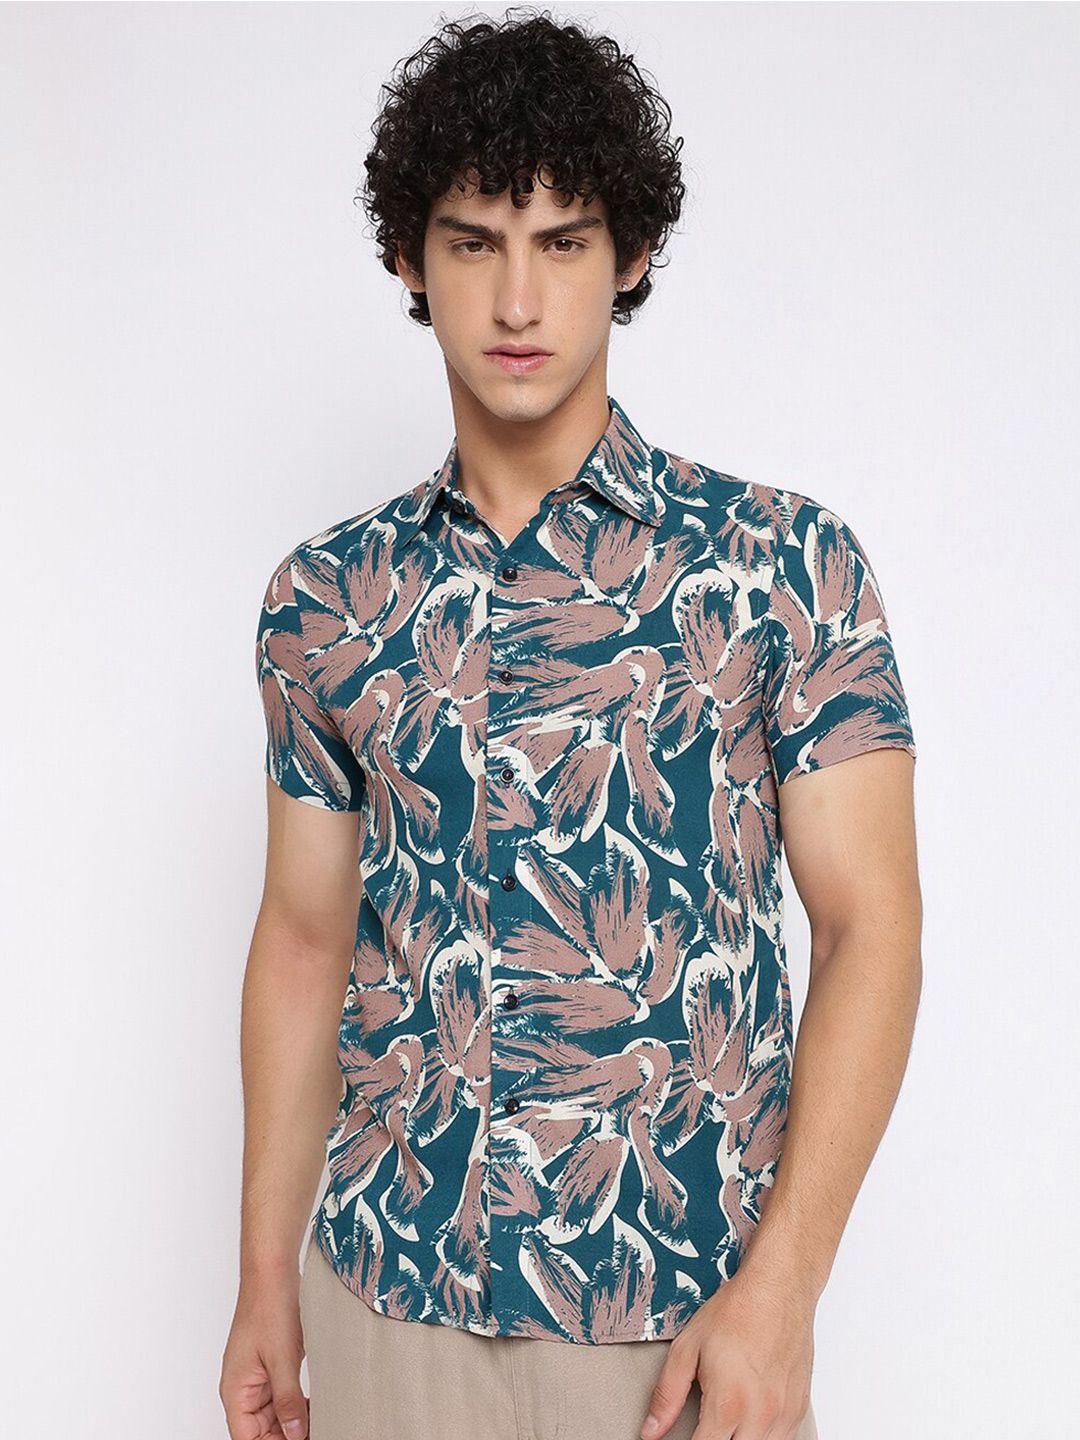 Shurtz N Skurtz Abstract Printed Relaxed Fit Cotton Casual Shirt